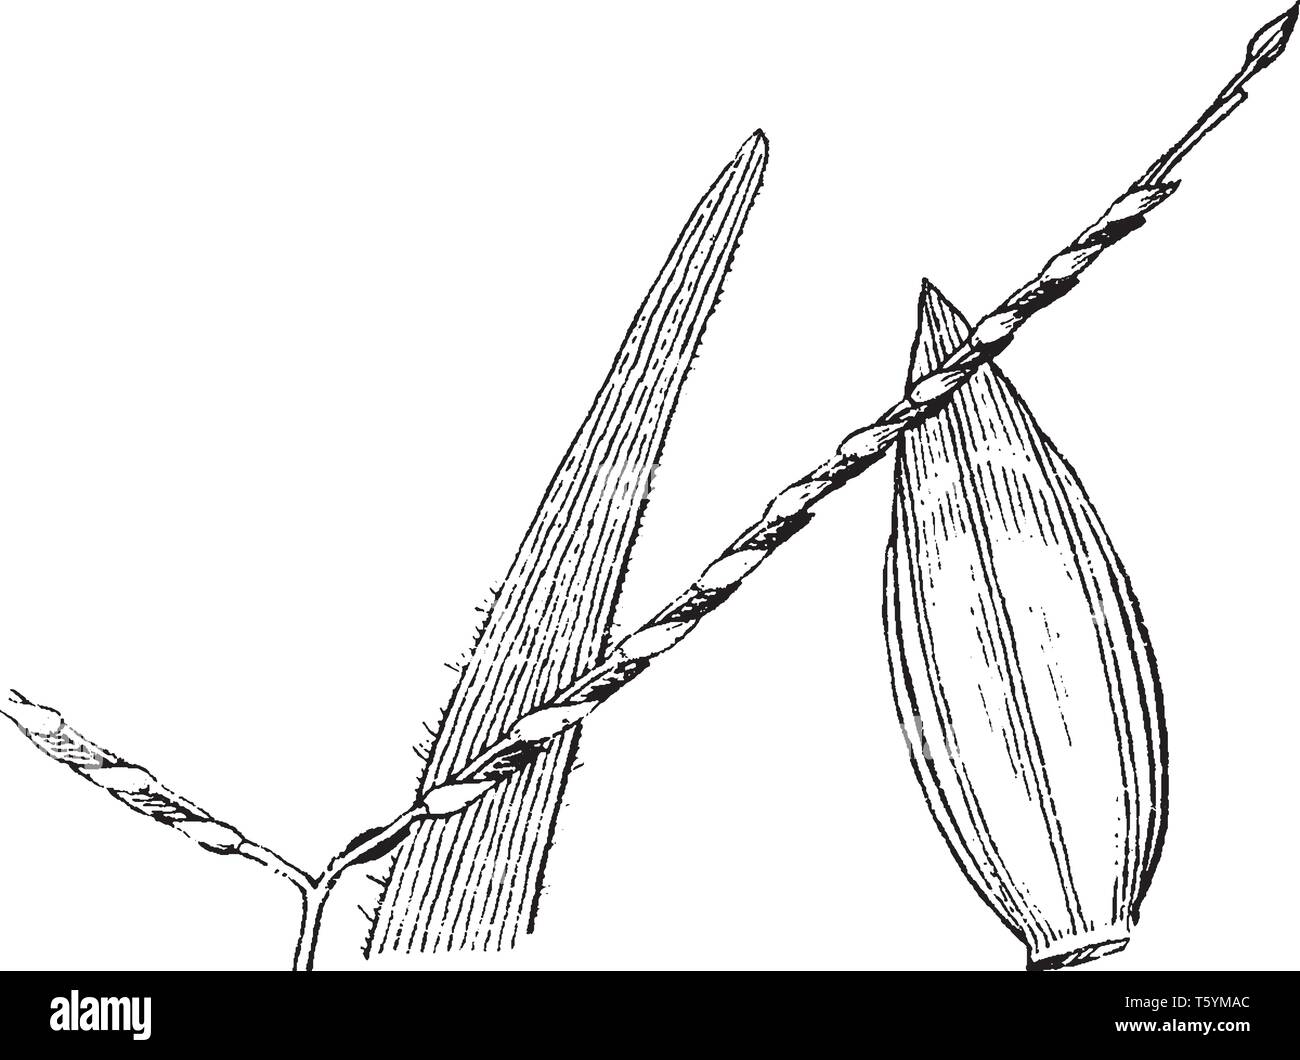 The axonopus leaf blad flat and lanceolate and broad. Leaves are hairy, spikelet short and flatted and pointed glume, vintage line drawing or engravin Stock Vector